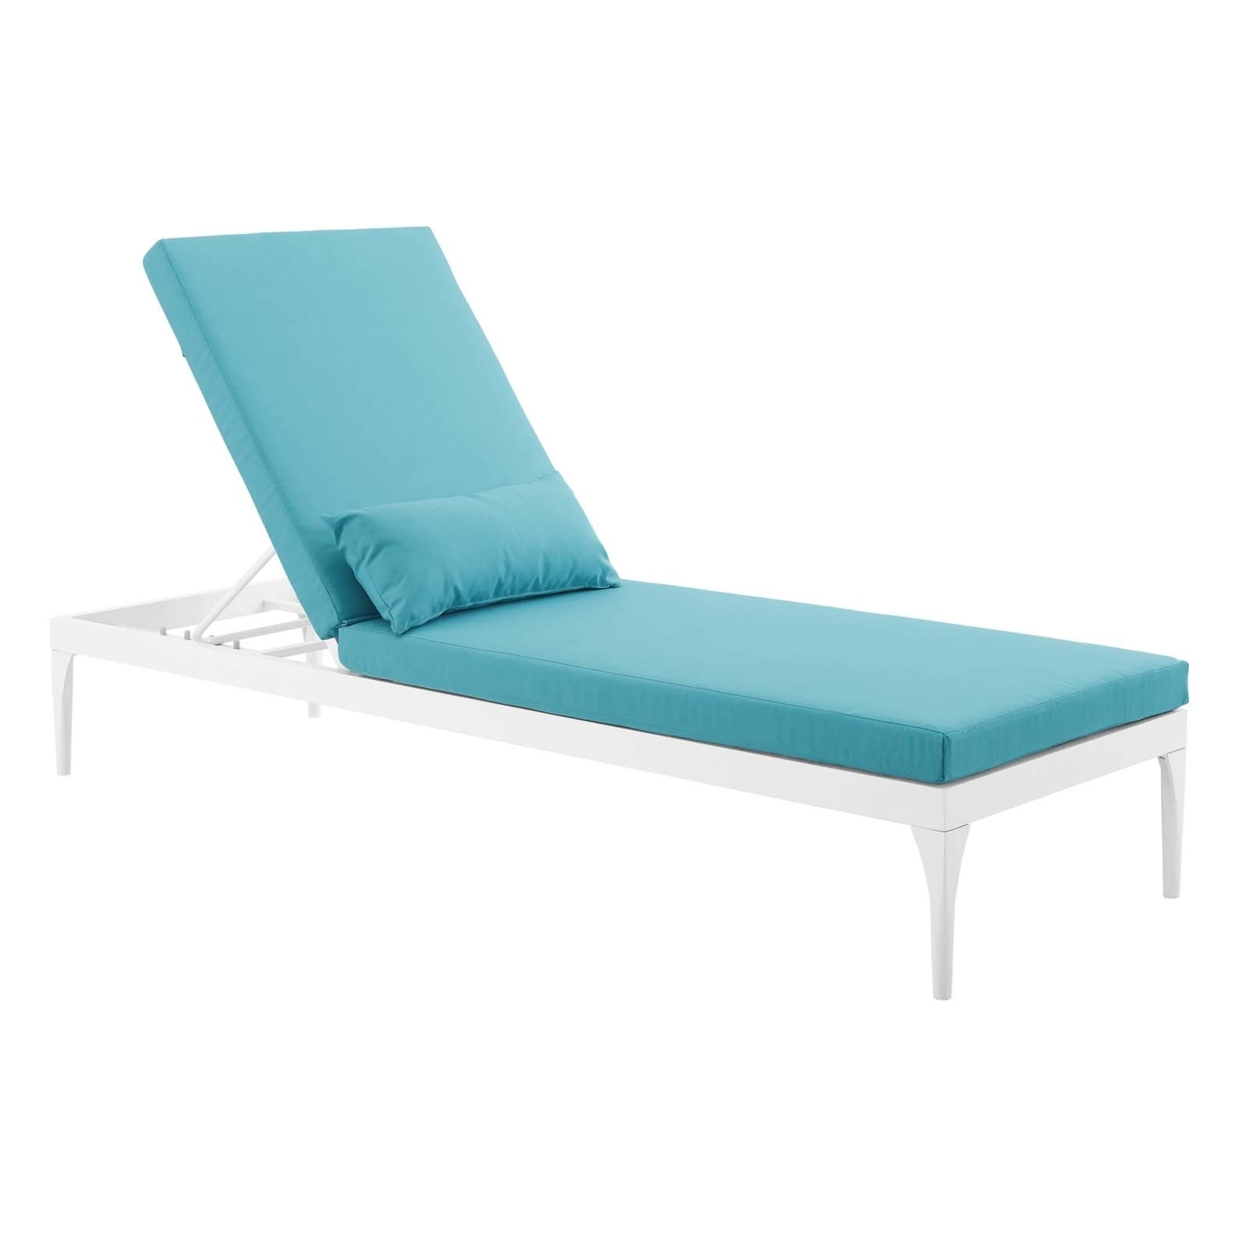 Perspective Cushion Outdoor Patio Chaise Lounge Chair (3301-WHI-TRQ)